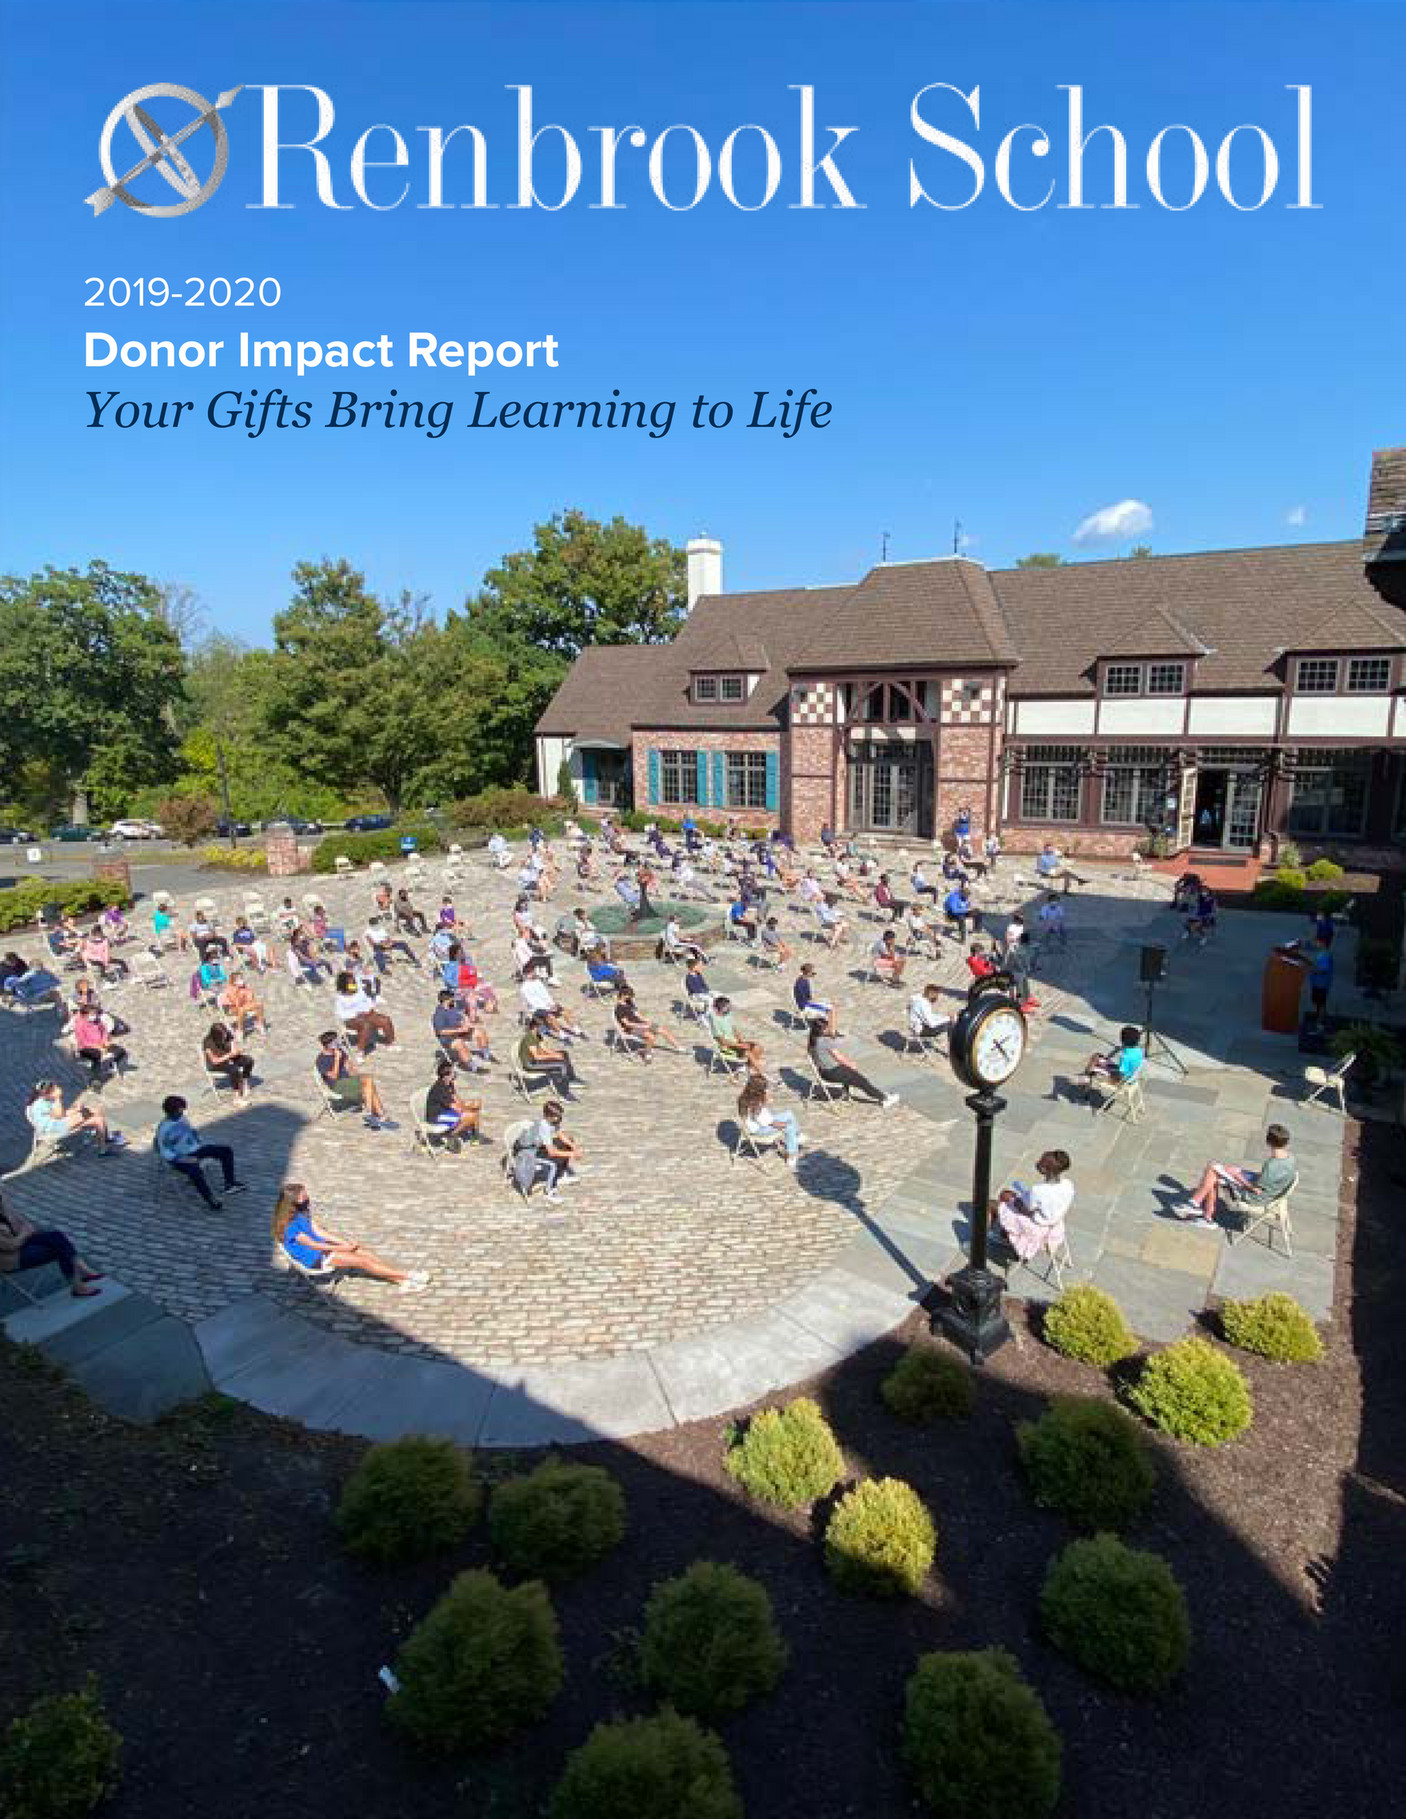 renbrook-school-annual-report-2019-20-page-1-created-with-publitas